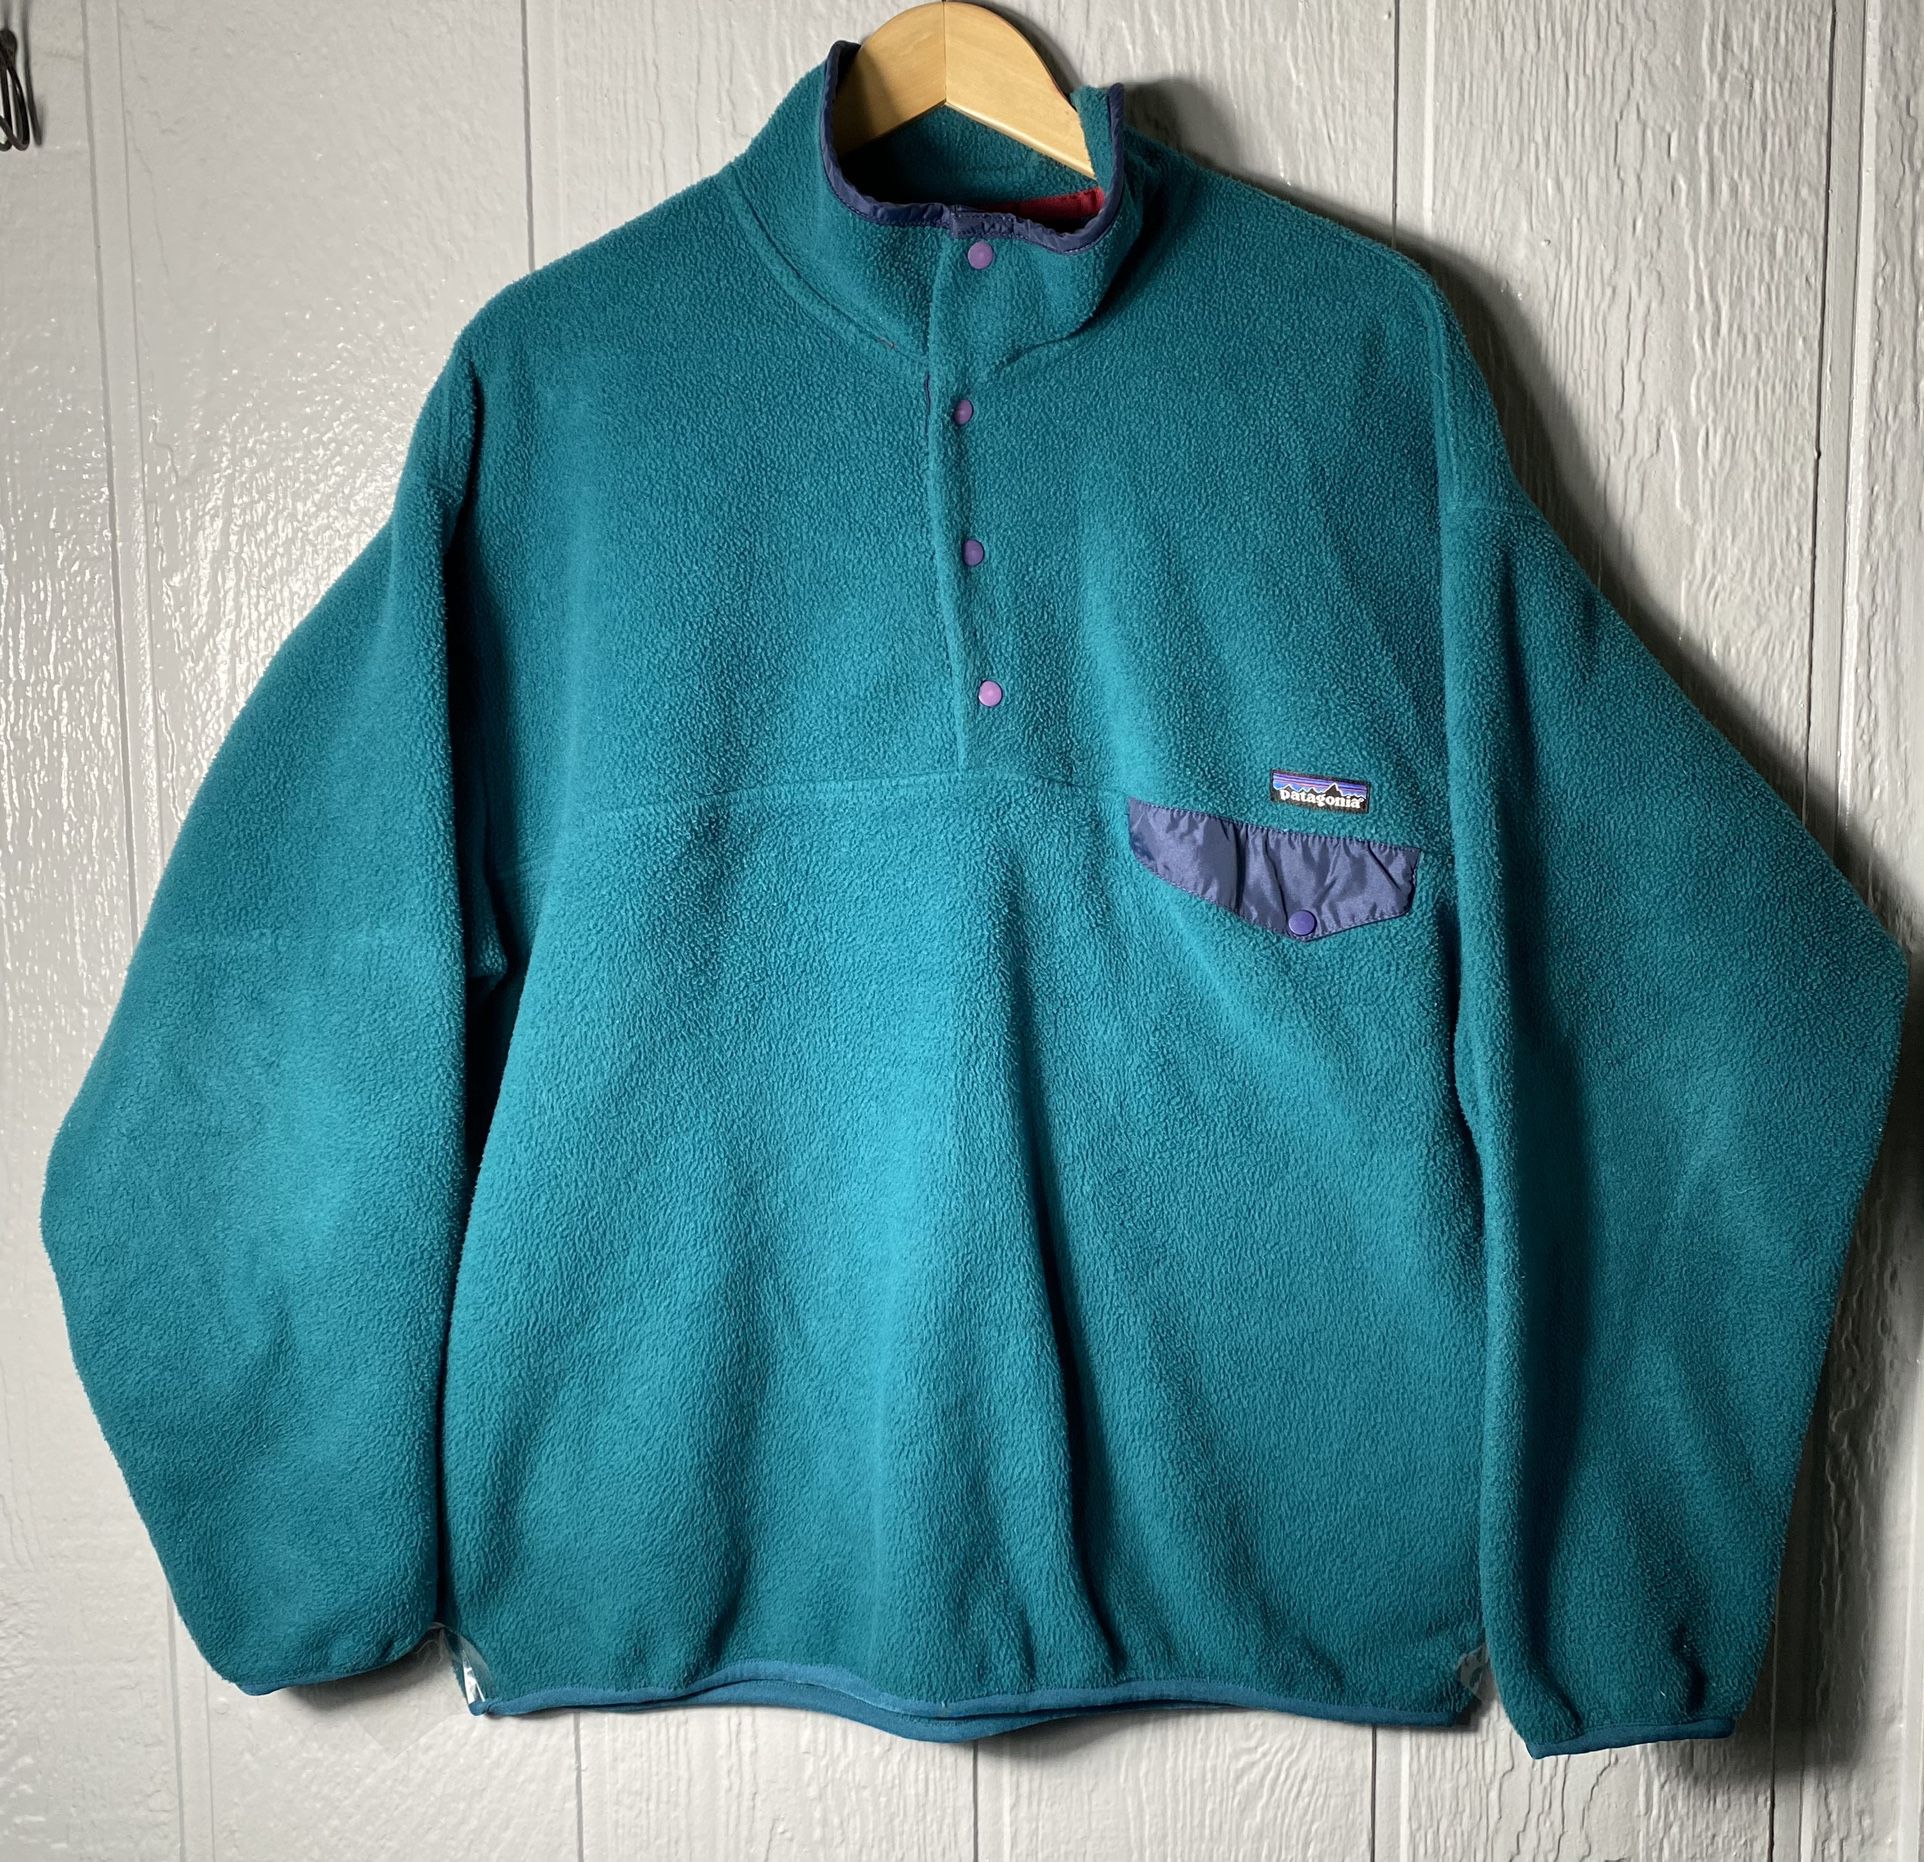  Vintage Patagonia Made In Jamaica Synchilla Snap-T 1990s - XL